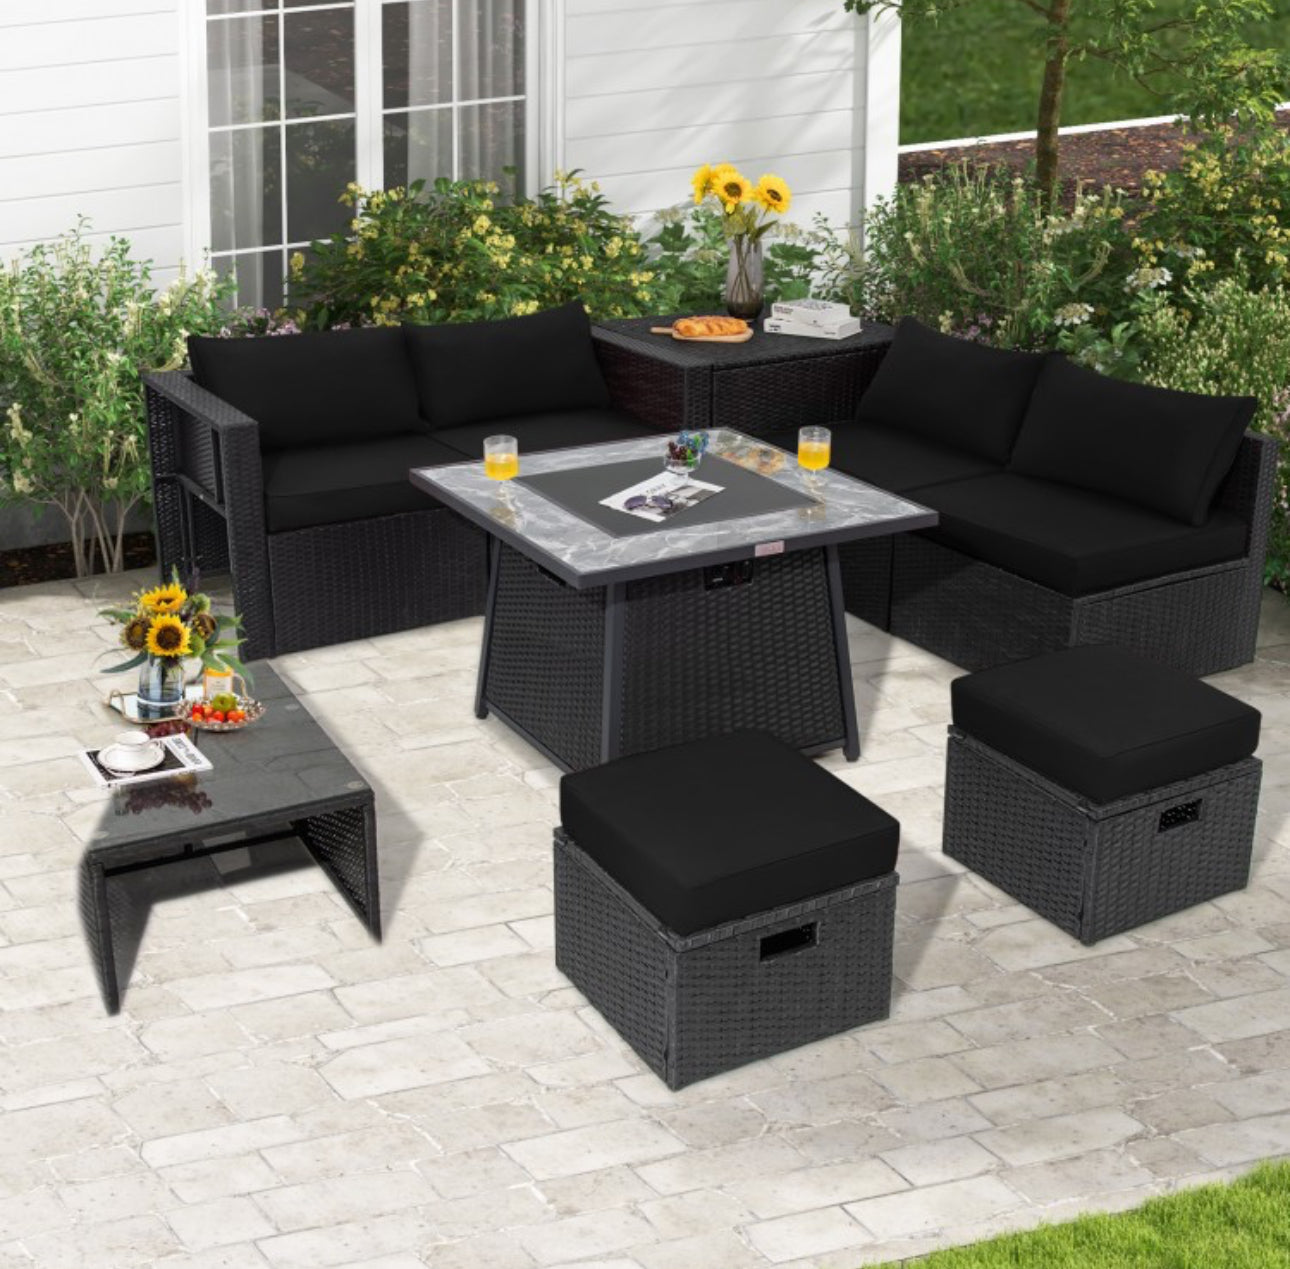 Elegant & Classy 9 Piece Outdoor Wicker Sectional With 35 Inch Gas Fire Pit Table Heavy Duty | In 6 Colours | Cover | Patio furniture